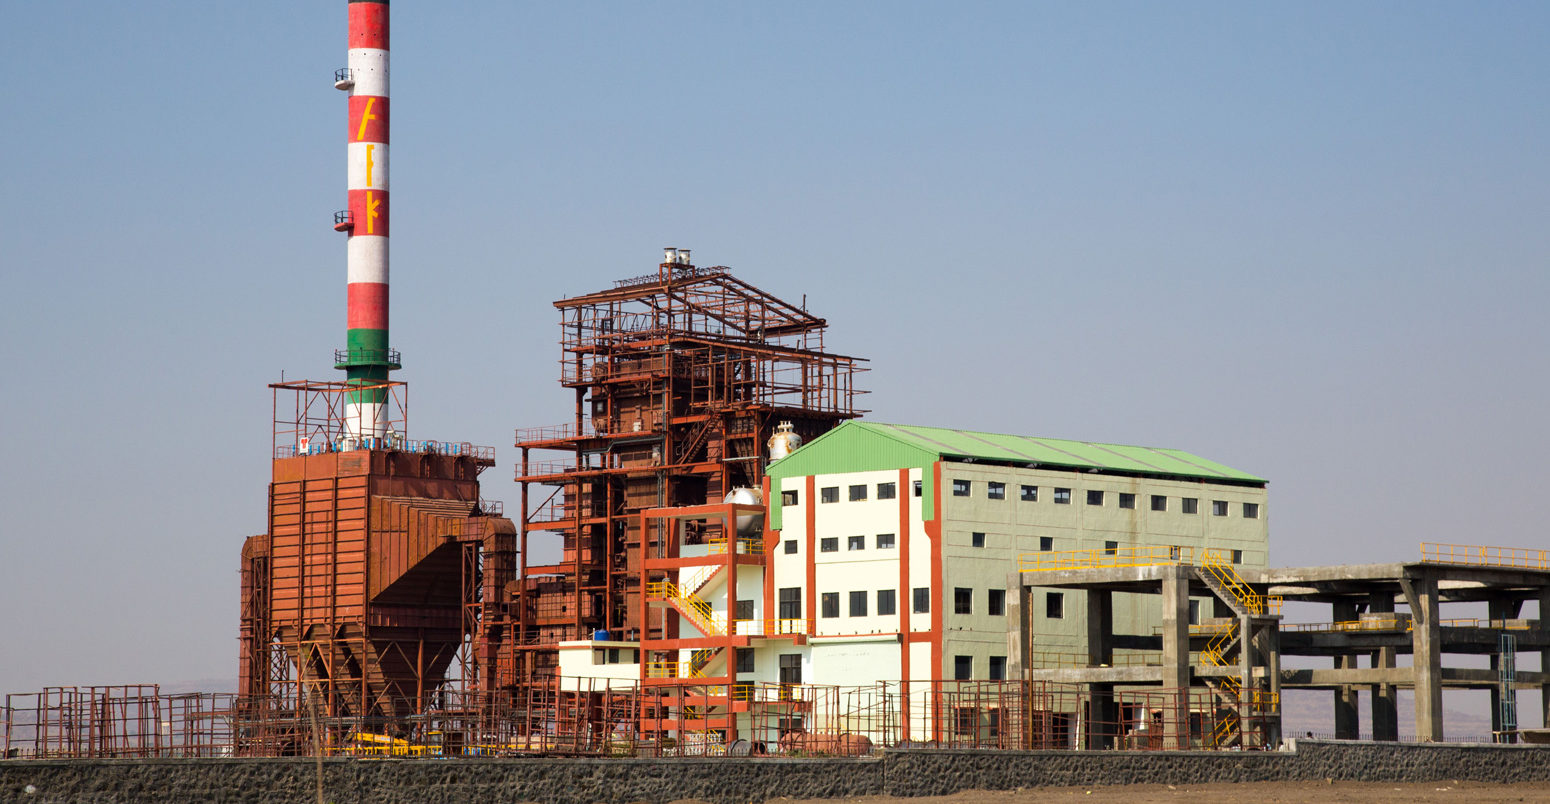 Coal fired electric power plant in India